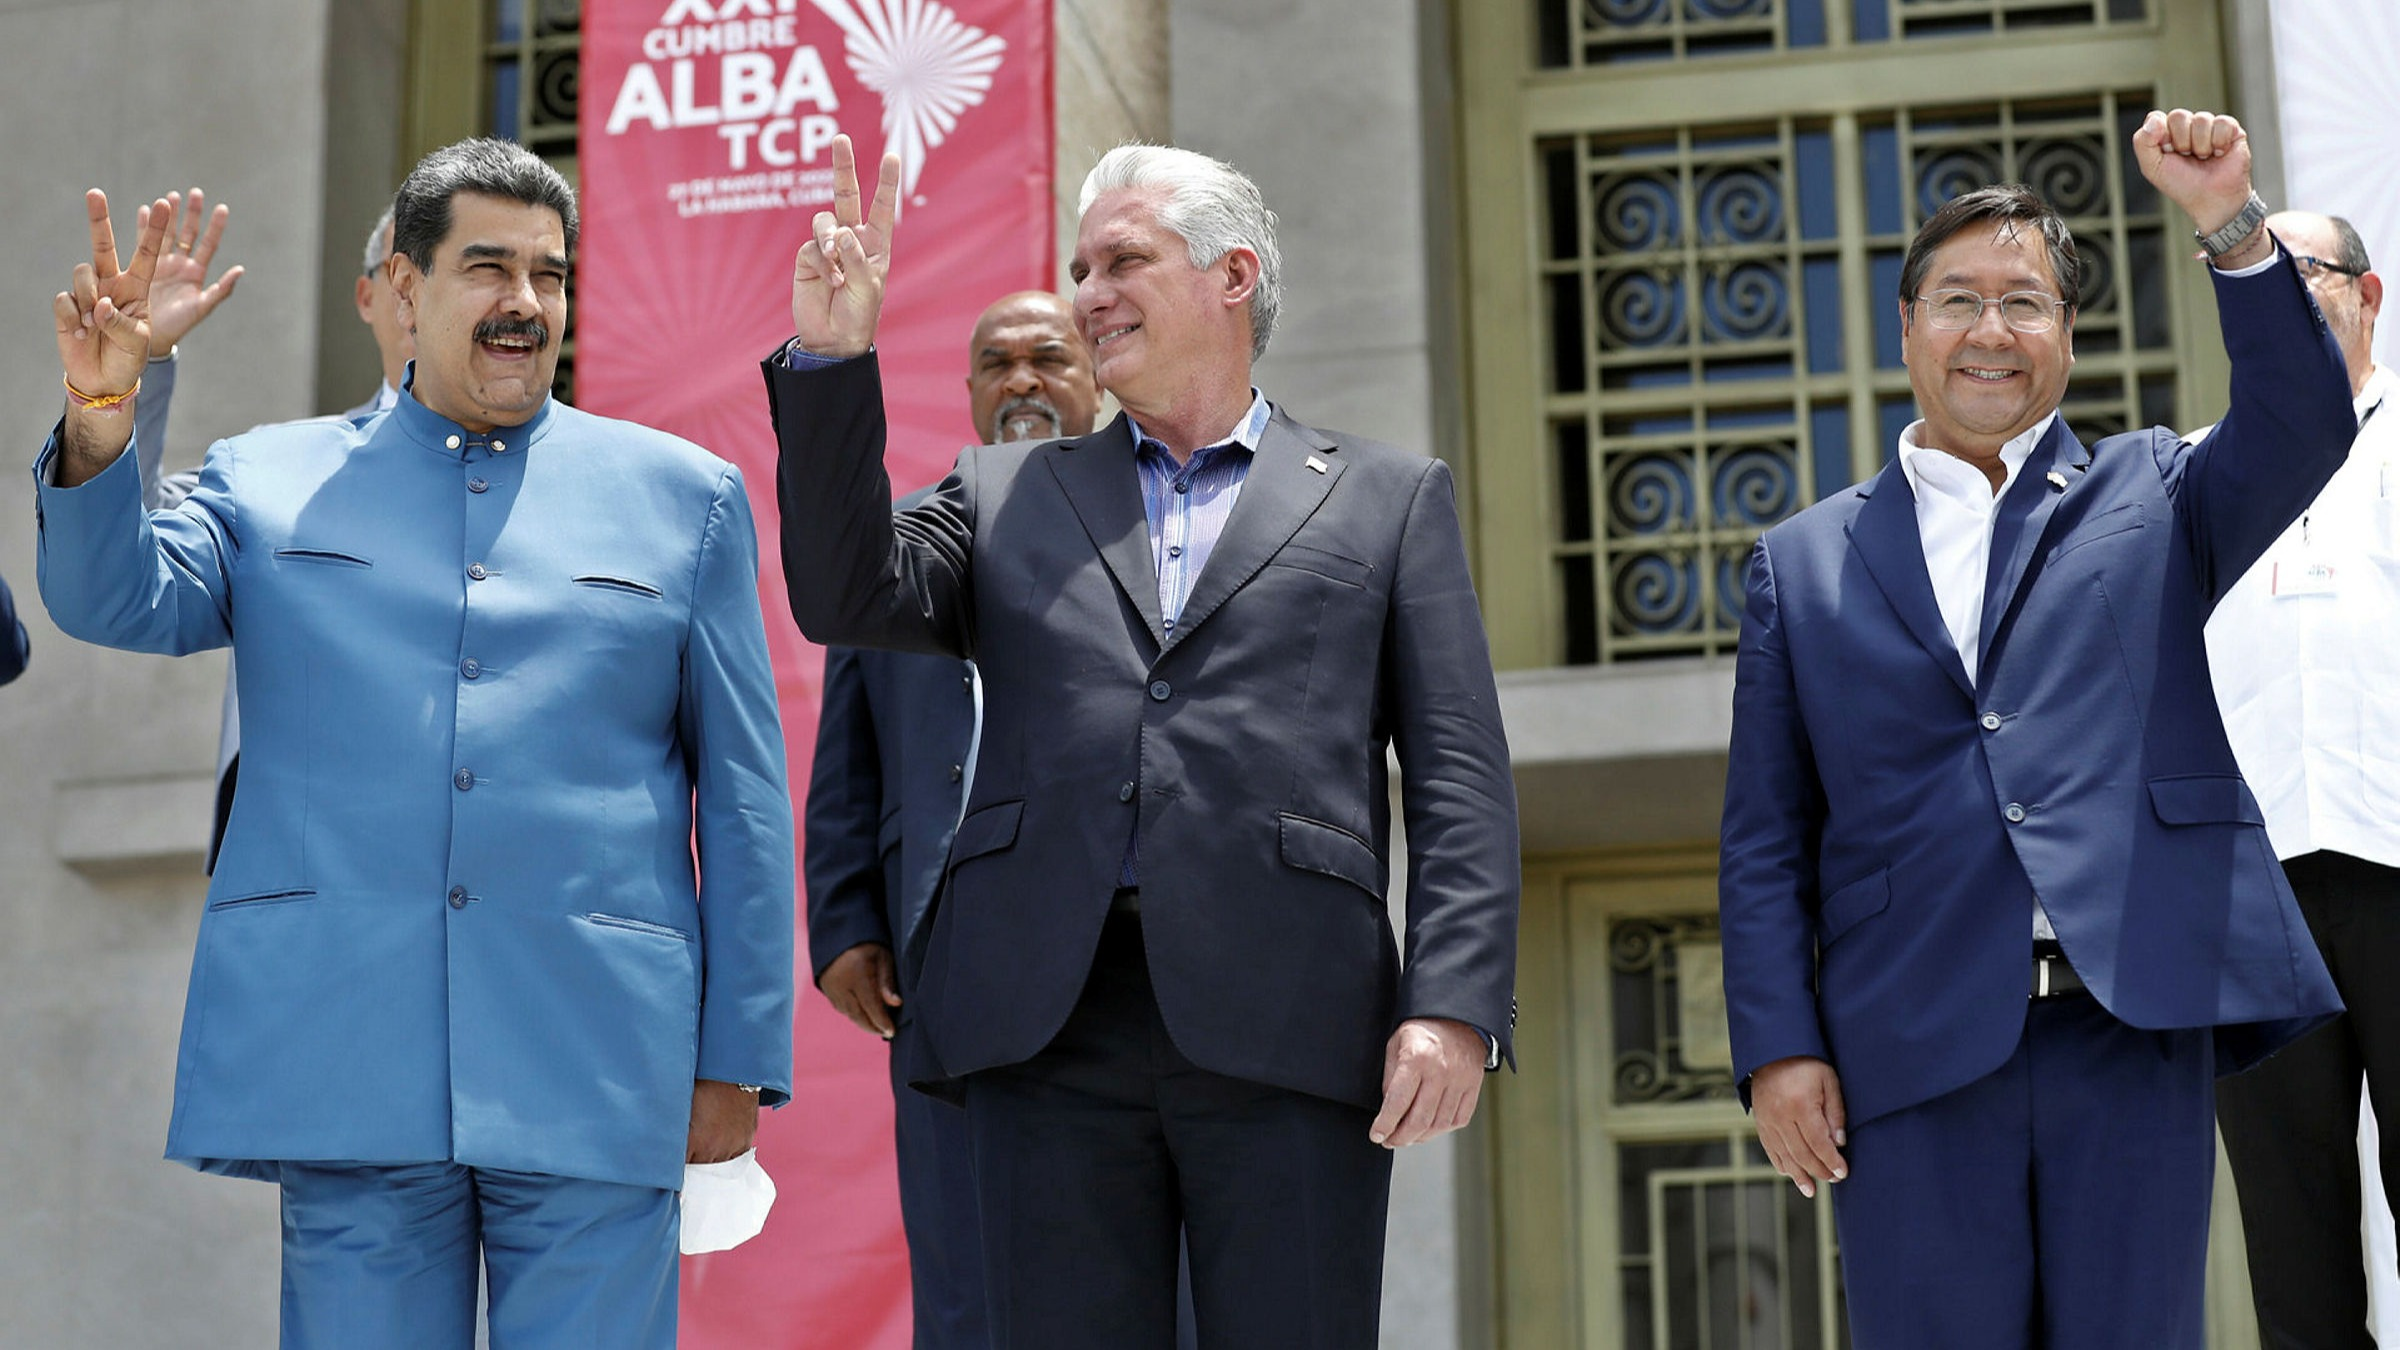 In this context, President Nicolás Maduro was excluded from the 2018 Lima Summit due to the breakdown of the democratic regime in his nation and many countries, including Canada, recognized the opposition head of the National Assembly, Juan Guaidó, instead. 